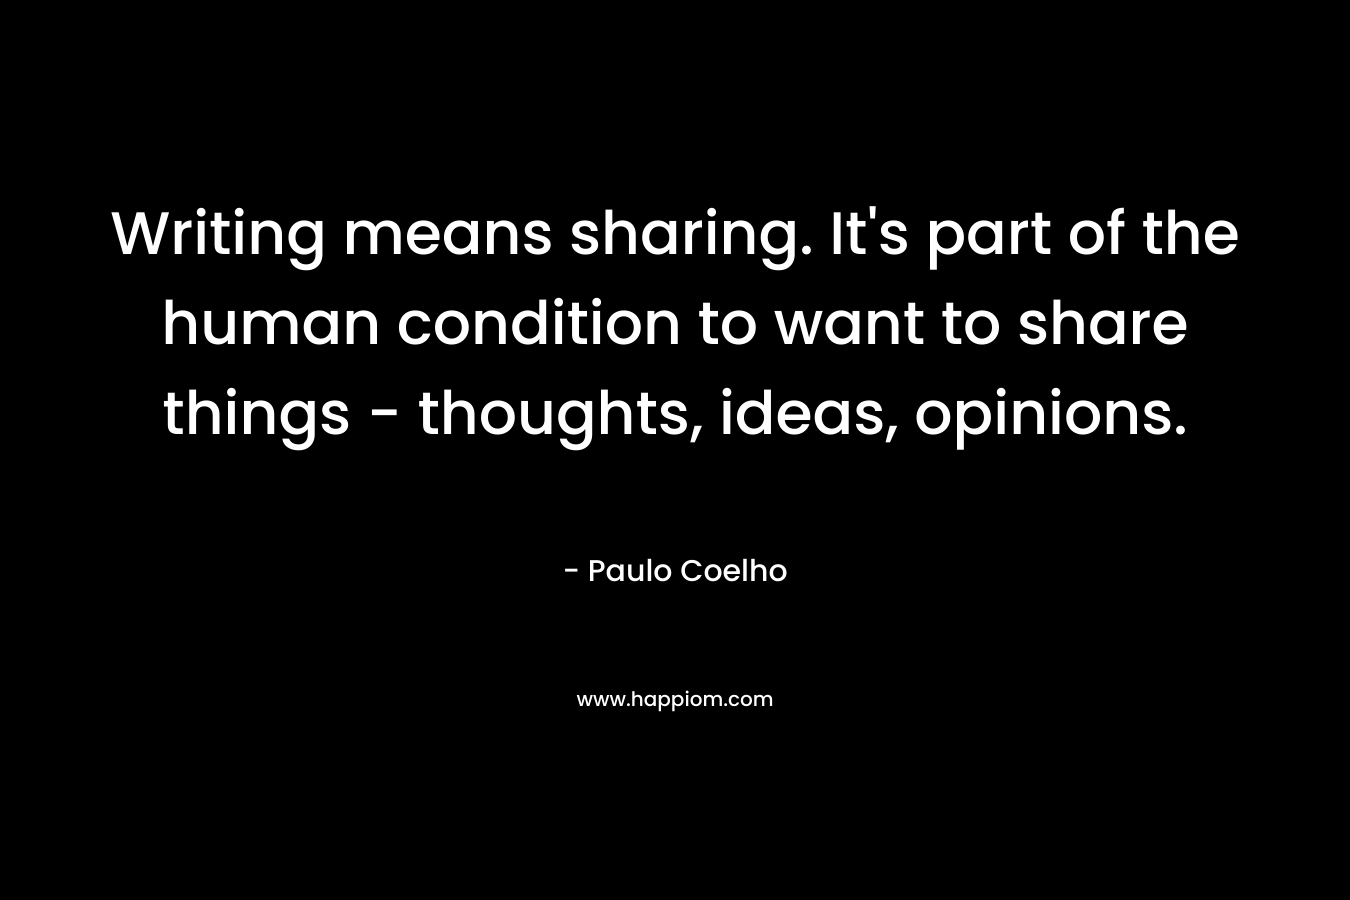 Writing means sharing. It’s part of the human condition to want to share things – thoughts, ideas, opinions. – Paulo Coelho